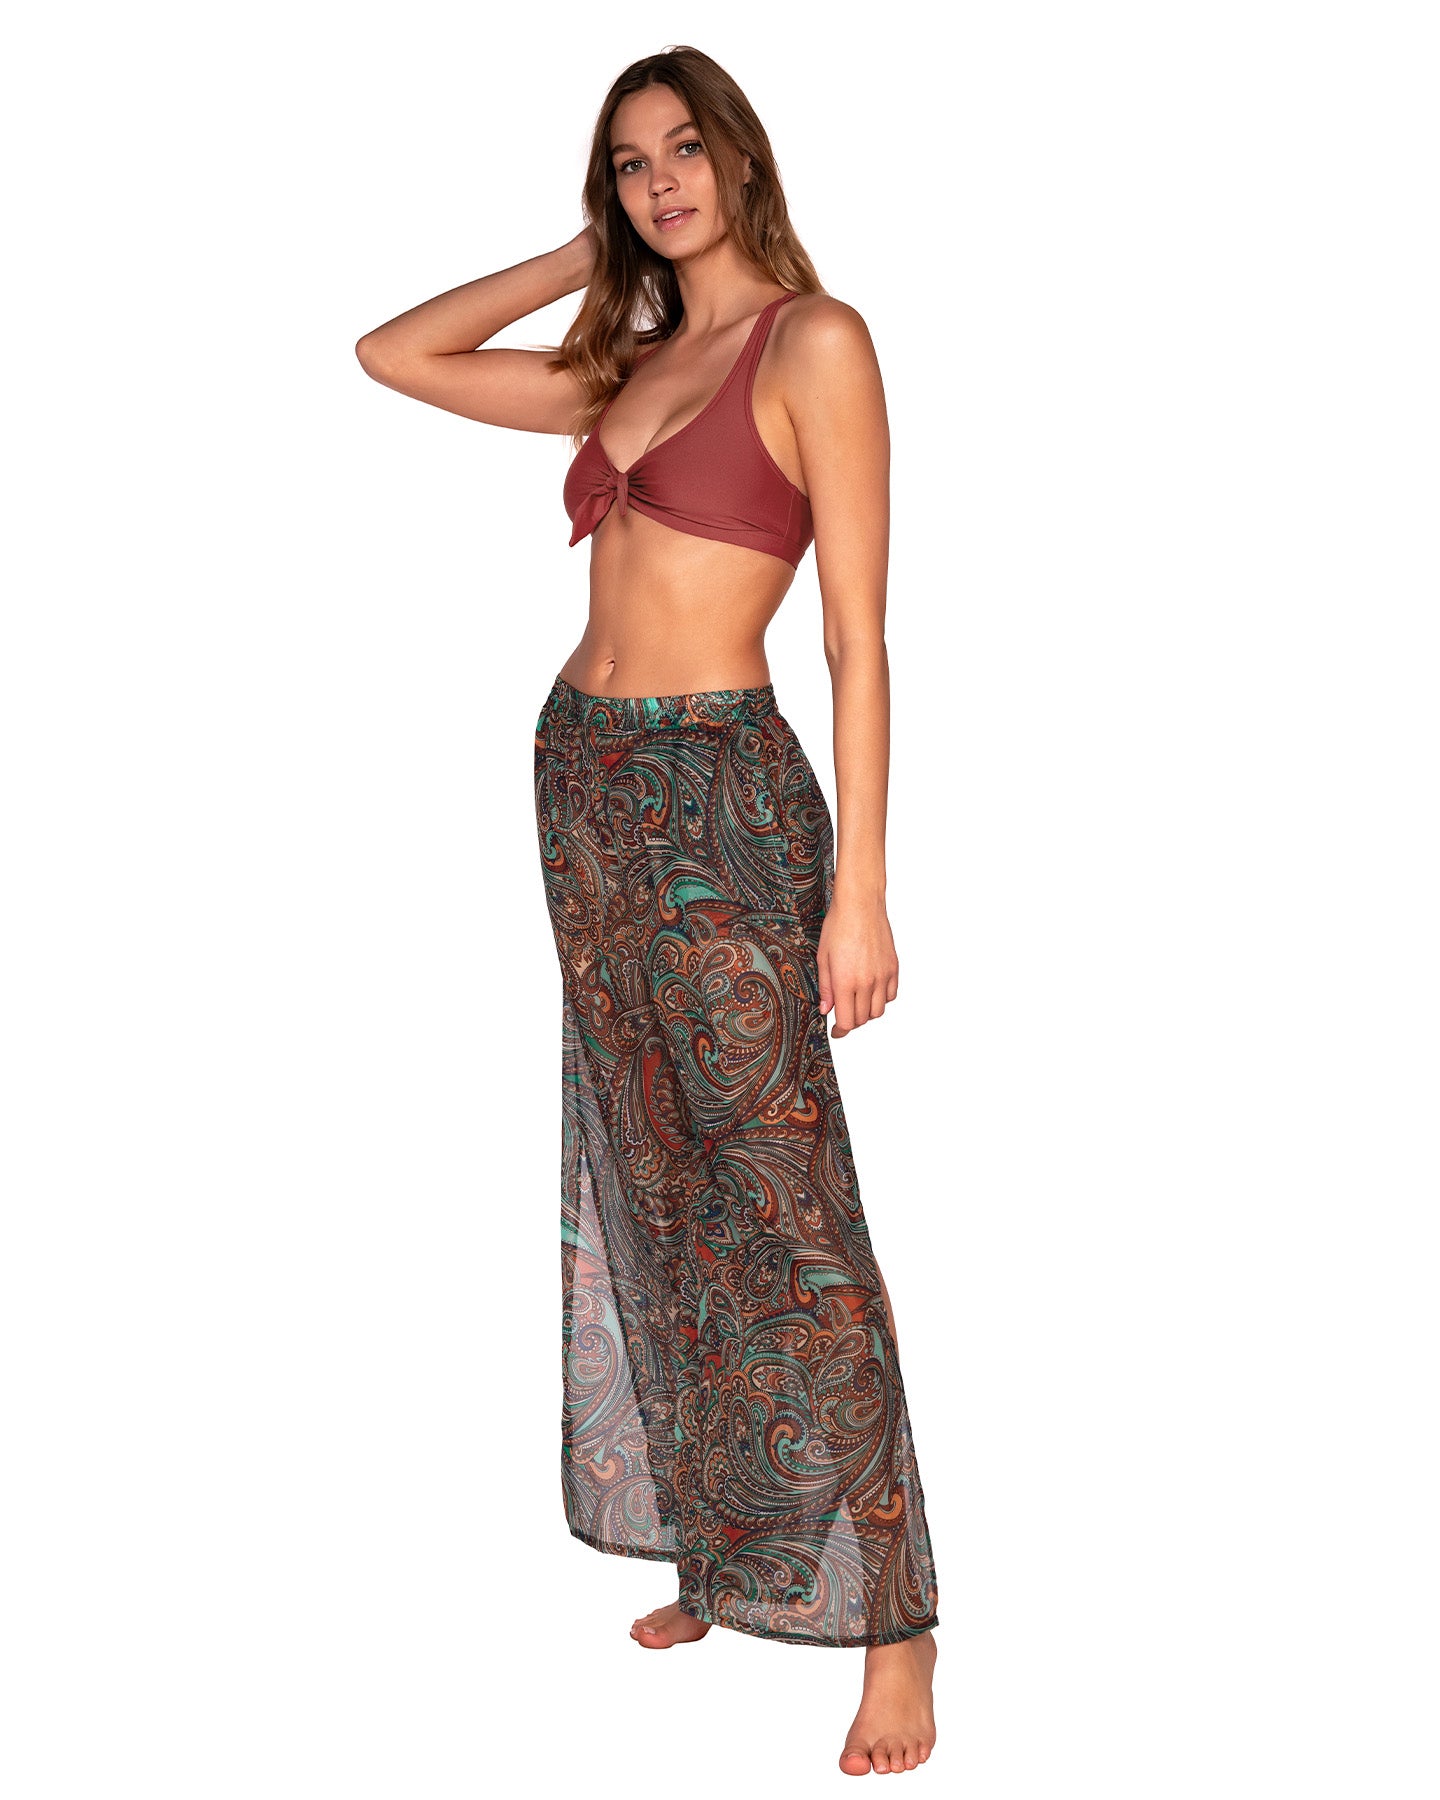 2023 Sunsets Anadalusia Breezy Beach Pant - 172